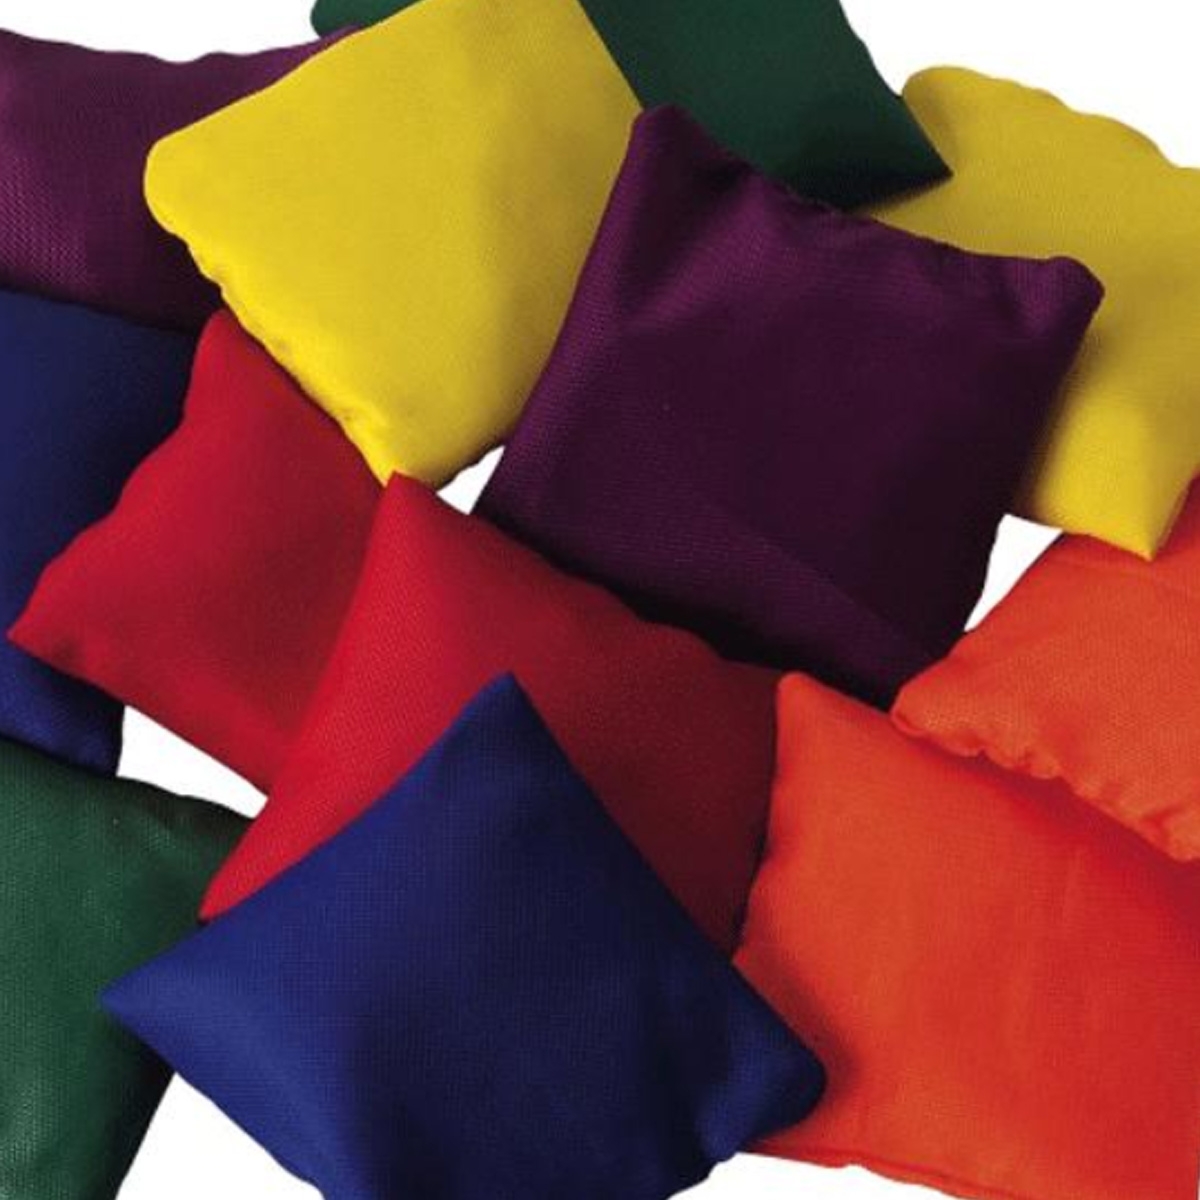 assorted color bean bags